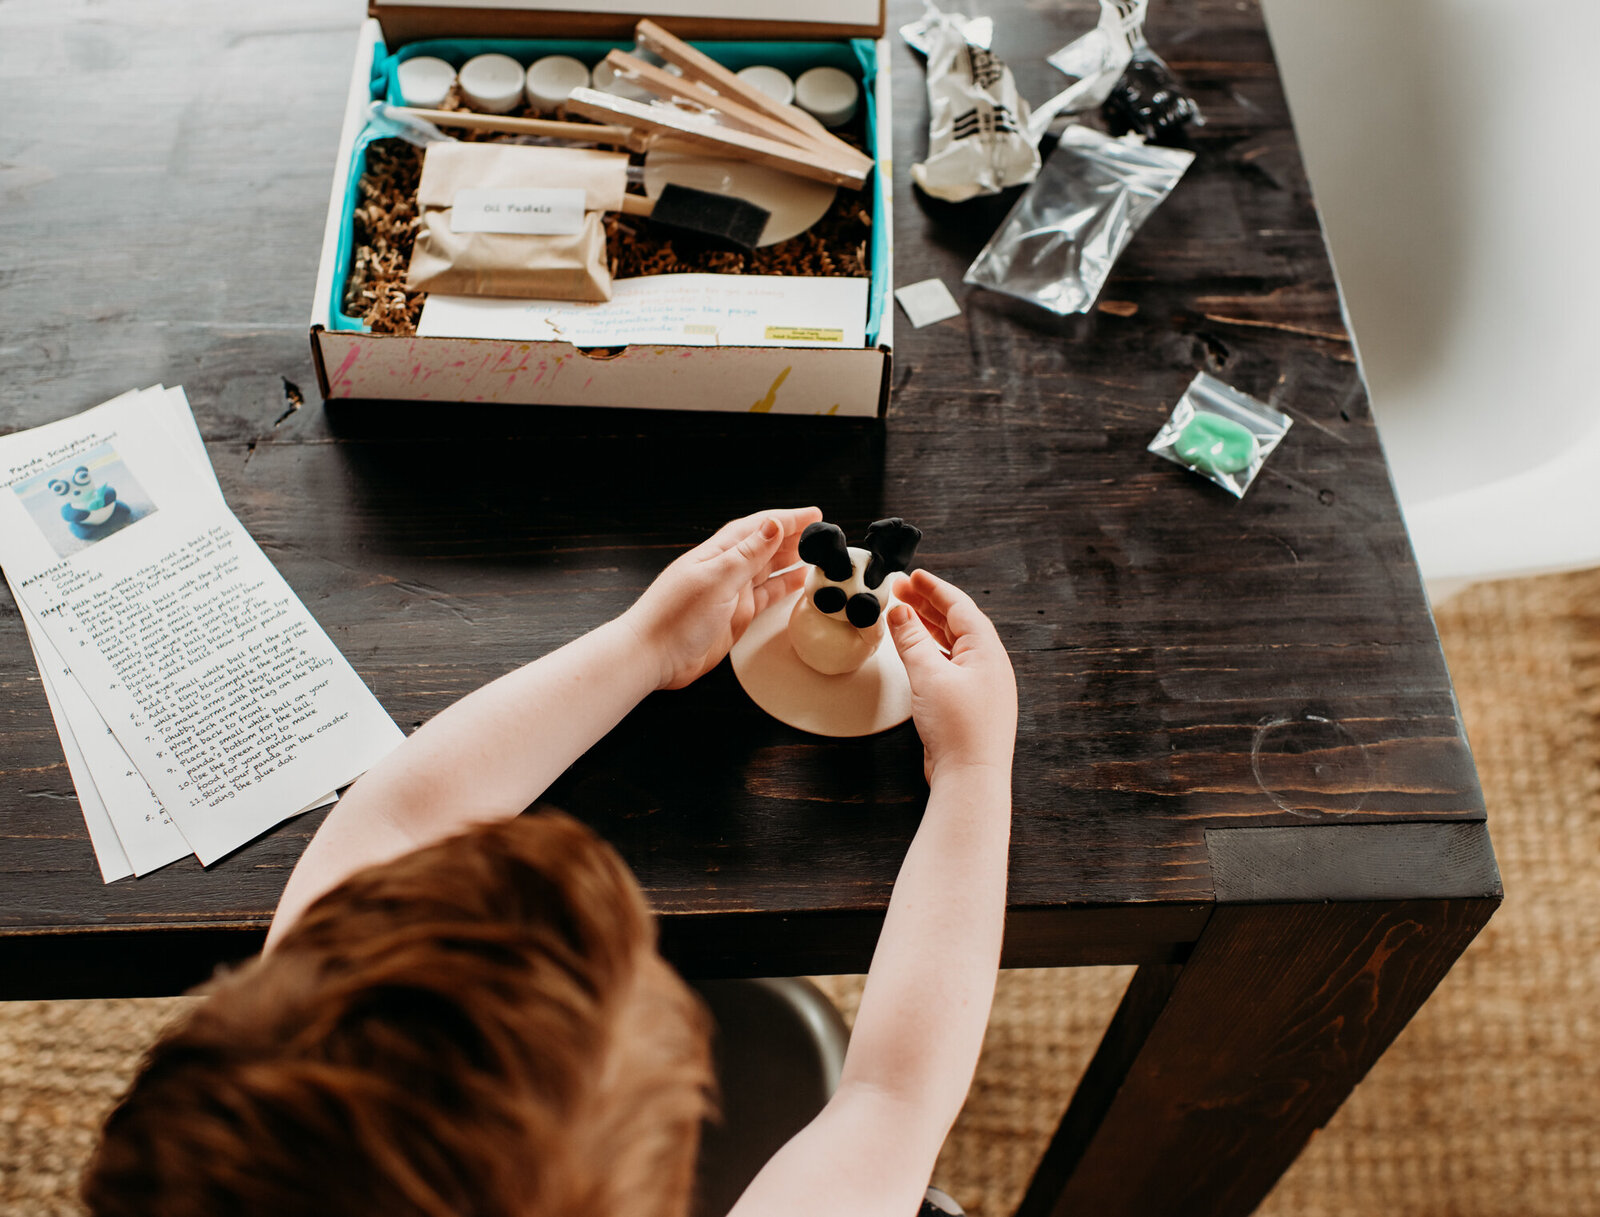 Branding Photographer, a child assembles something with a box of crafting tools